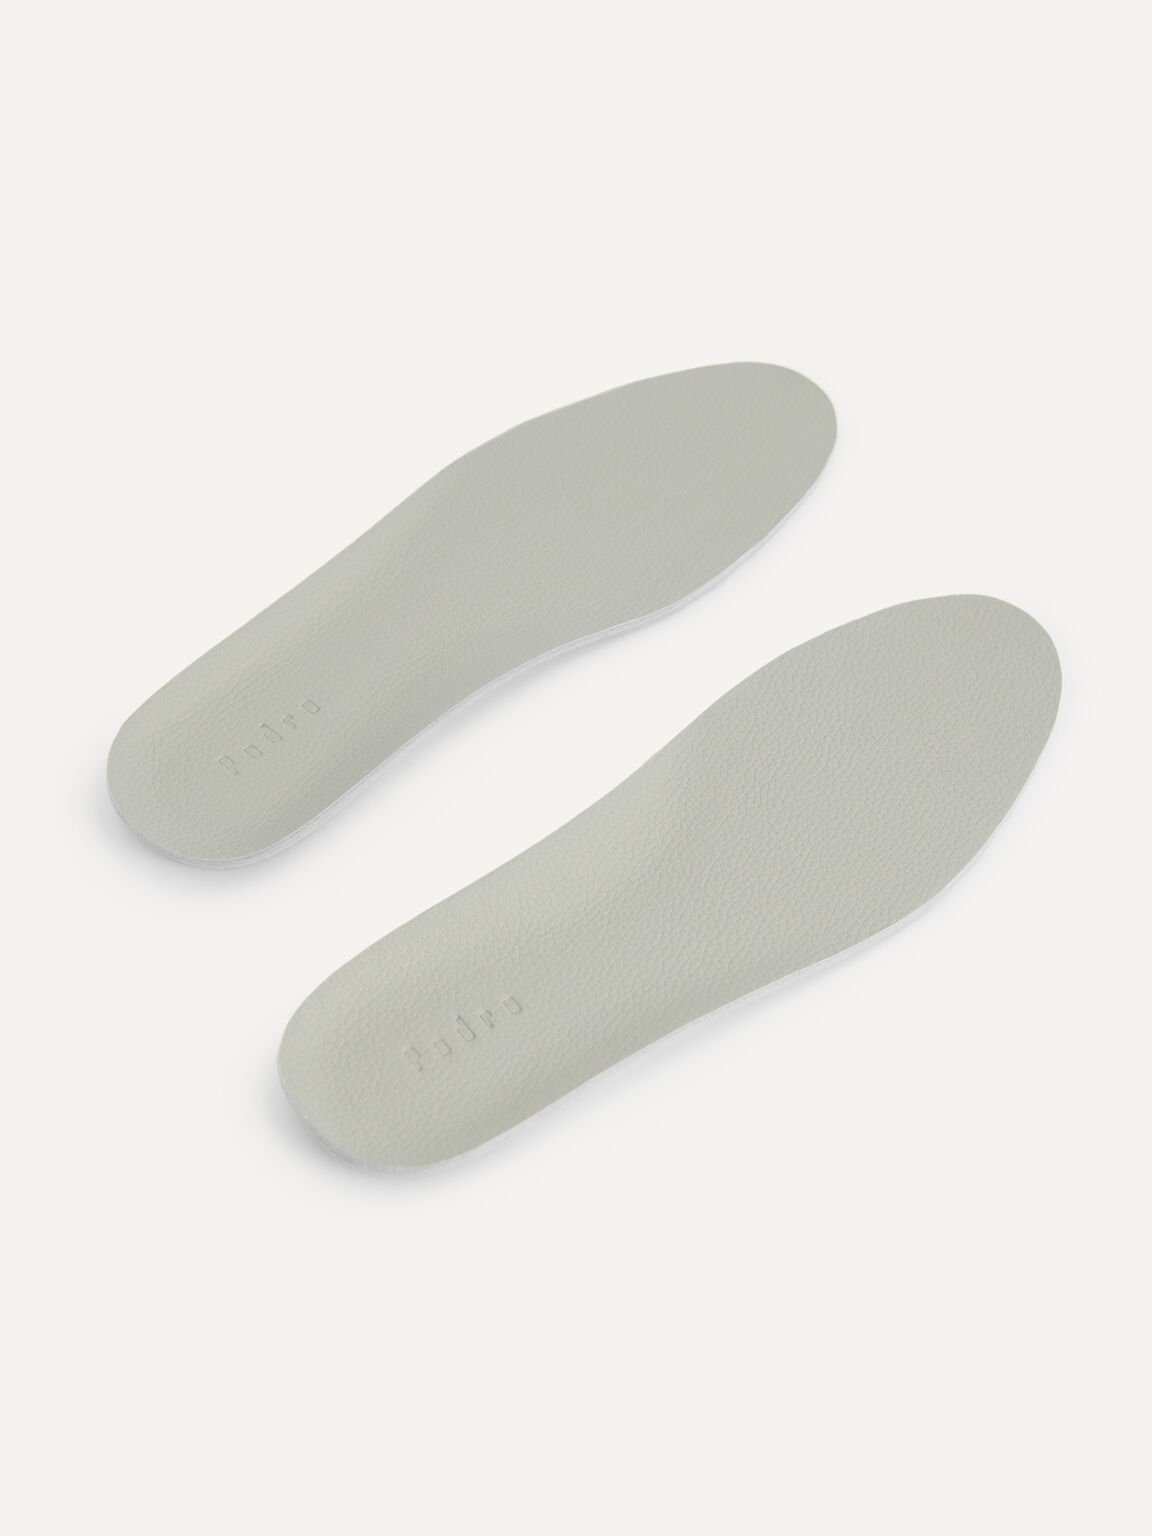 Sports Cushion Leather Insole, Light Grey, hi-res